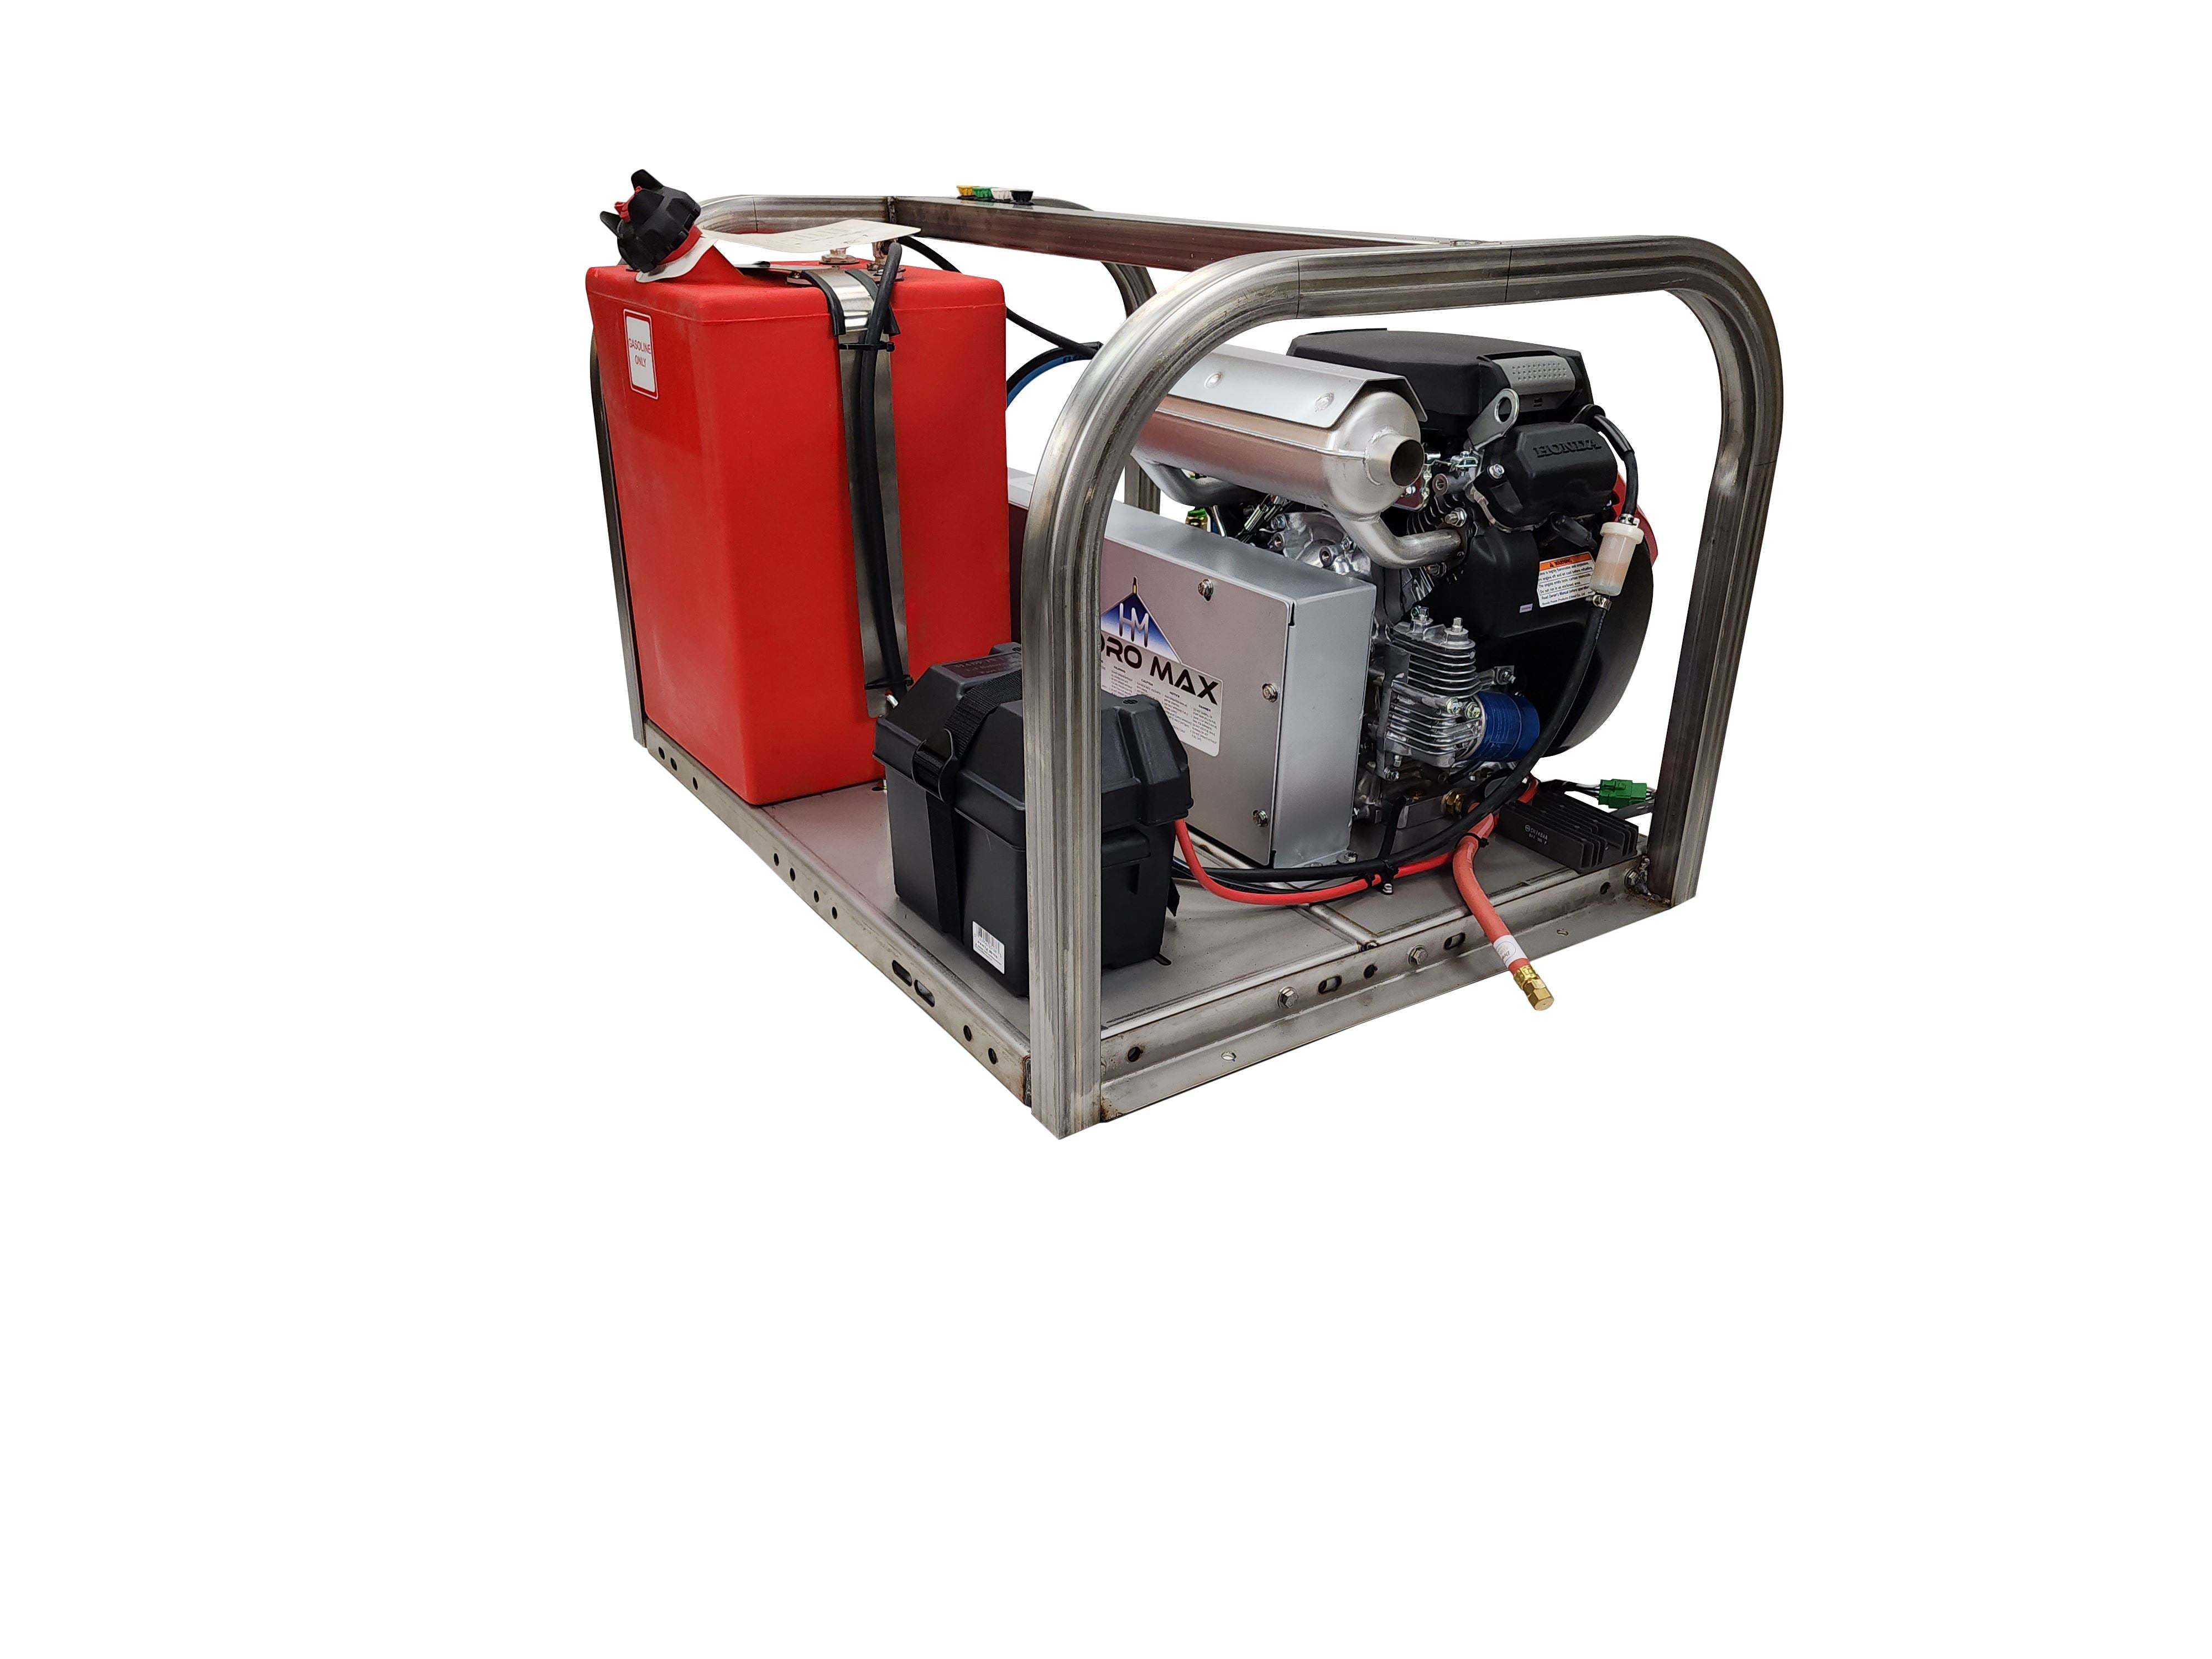 Hydro Max CW8030HG-8gpm@3000psi Business & Industrial Hydro Max 